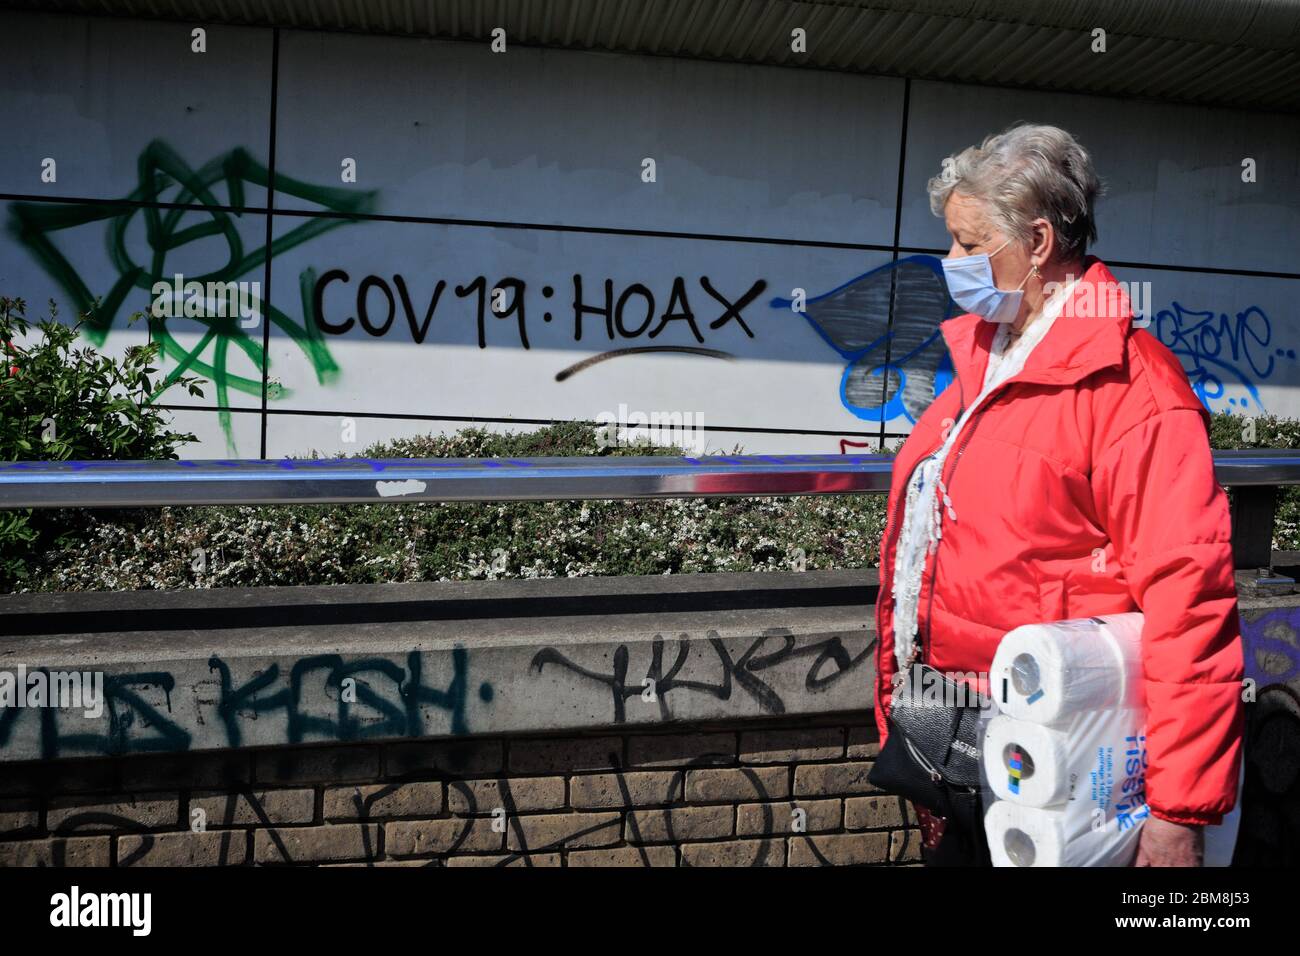 London, UK.  A woman carrying toilet roll, and wearing face covering, can be seen walking past 'covid- 19 hoax' graffiti amid the covid world crisis. Stock Photo